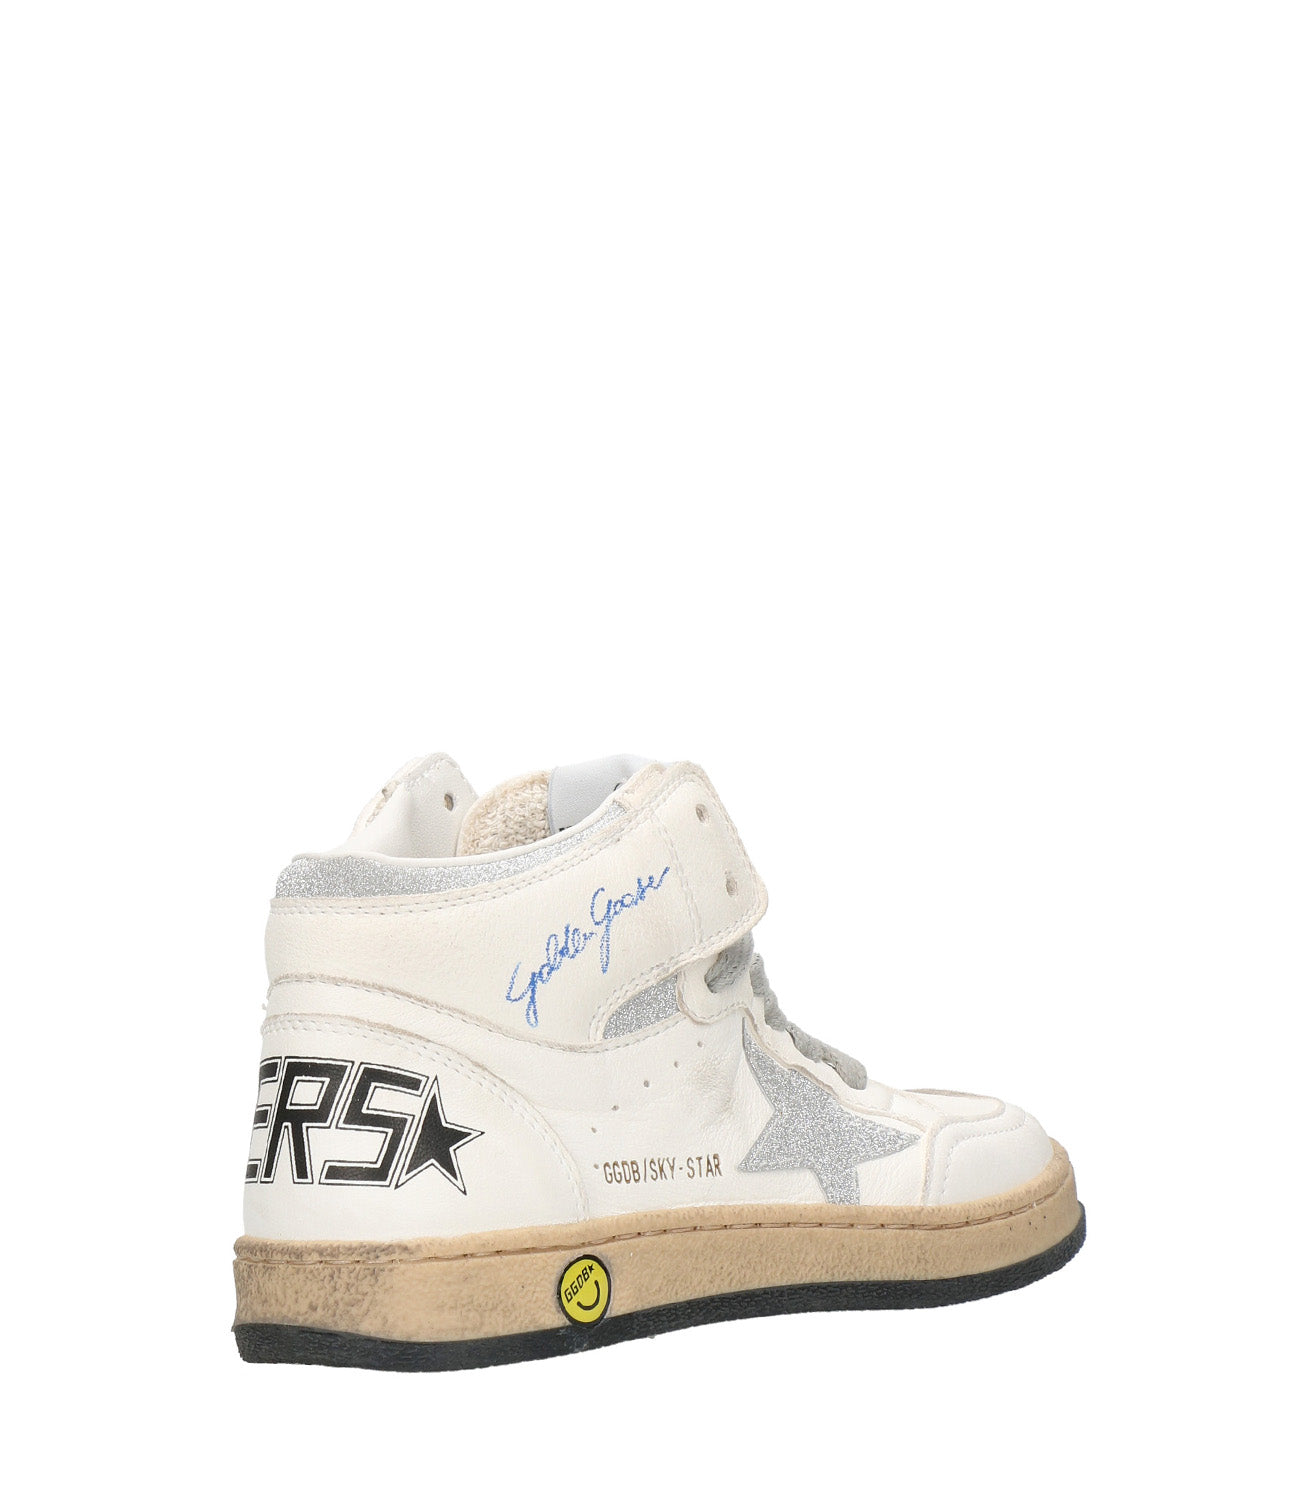 Golden Goose | Sky Star Sneakers White and Silver